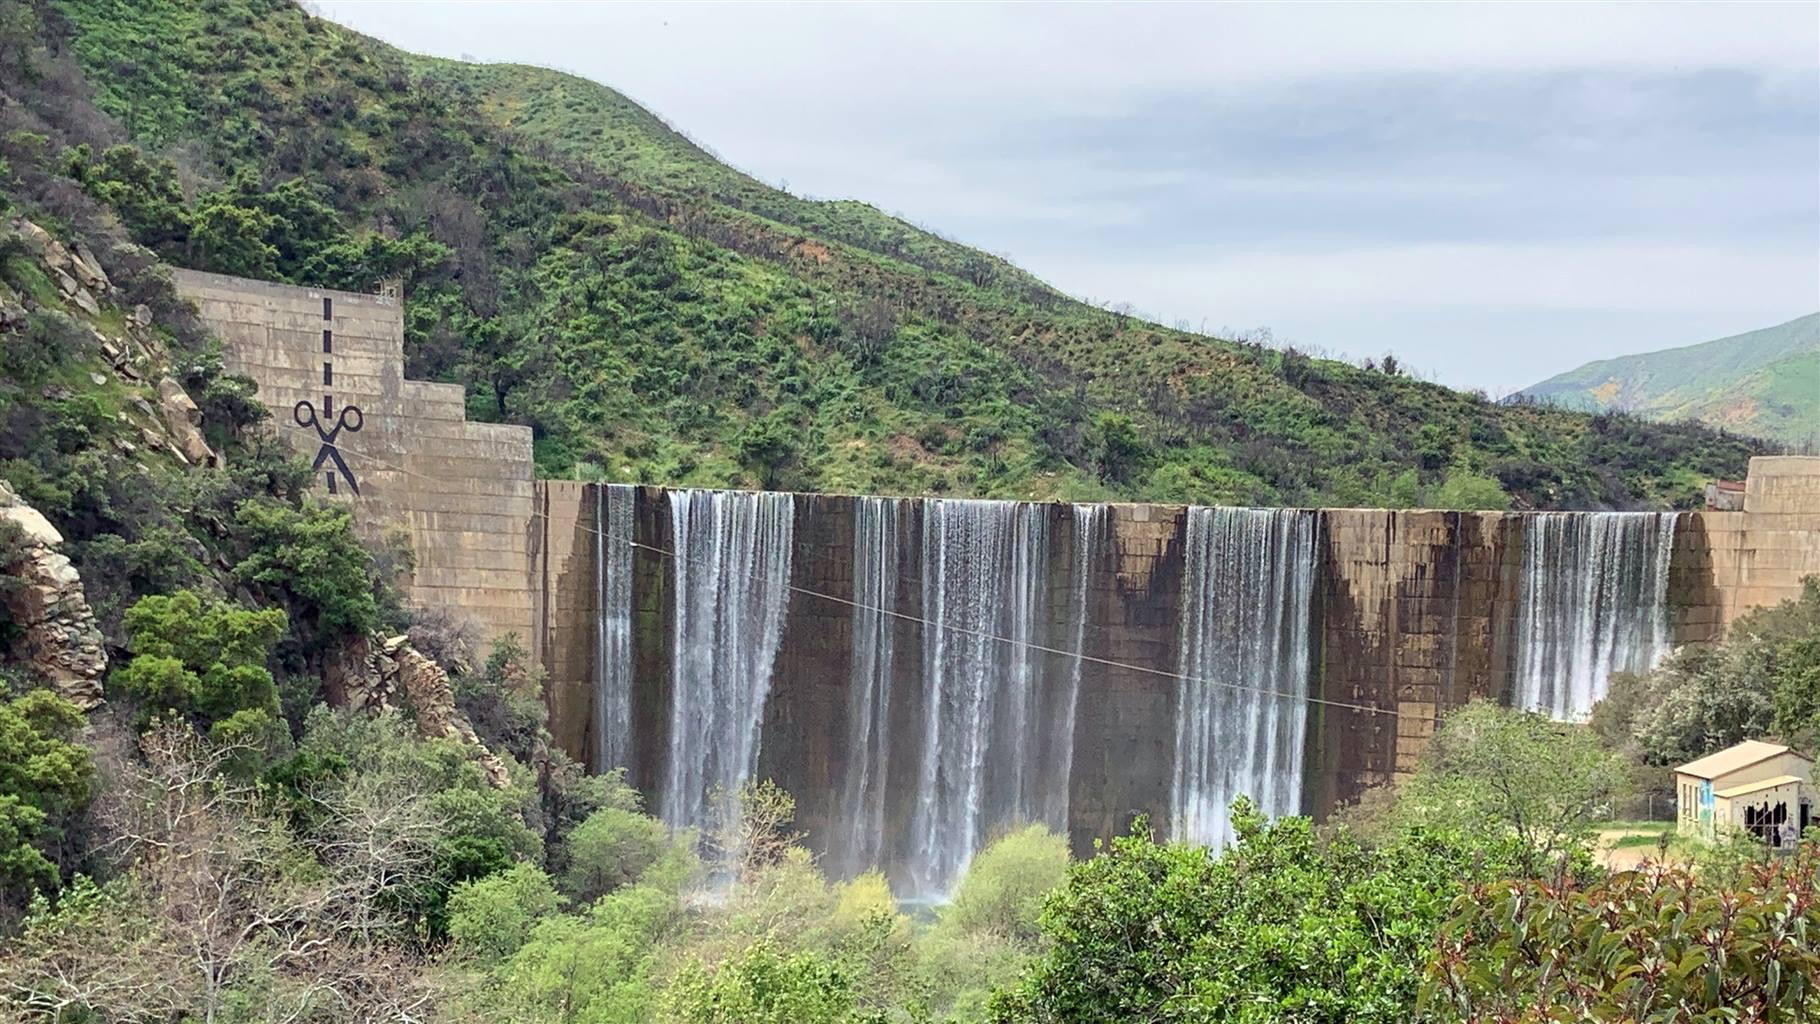 Seventy-four years after it was built, the Matilija Dam is harming the local ecosystem.